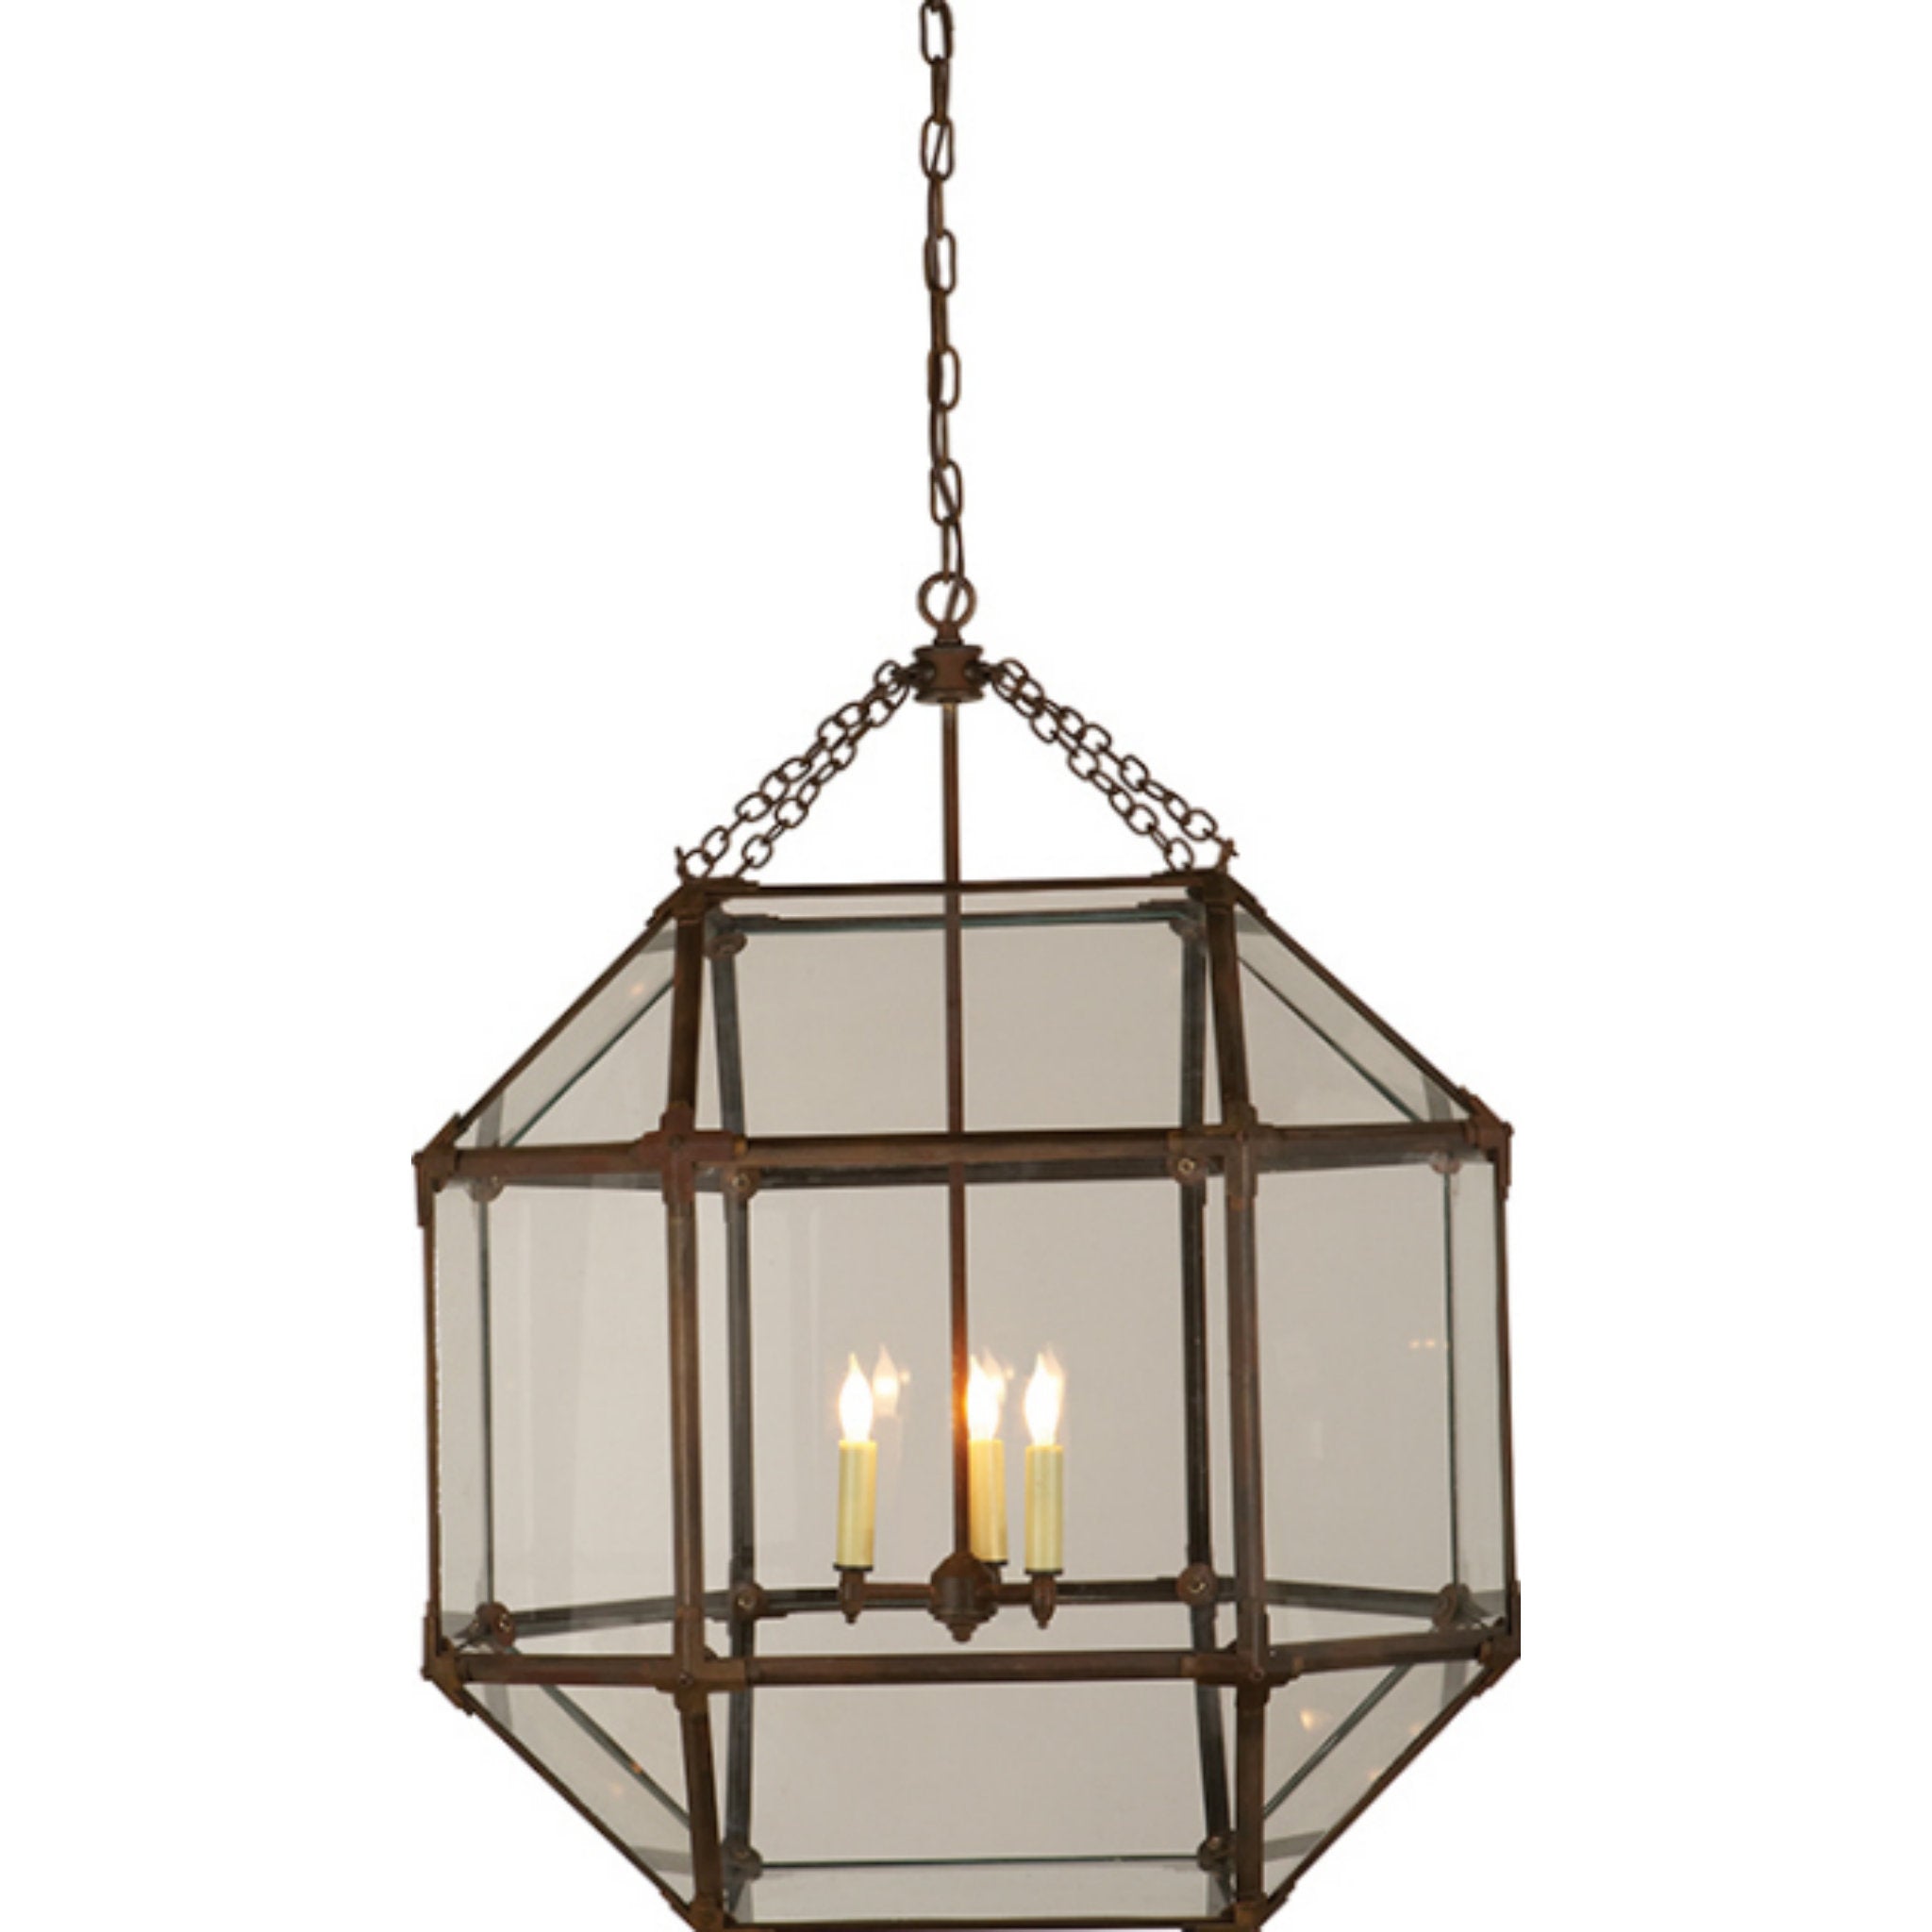 Suzanne Kasler Morris Large Lantern in Antique Zinc with Clear Glass